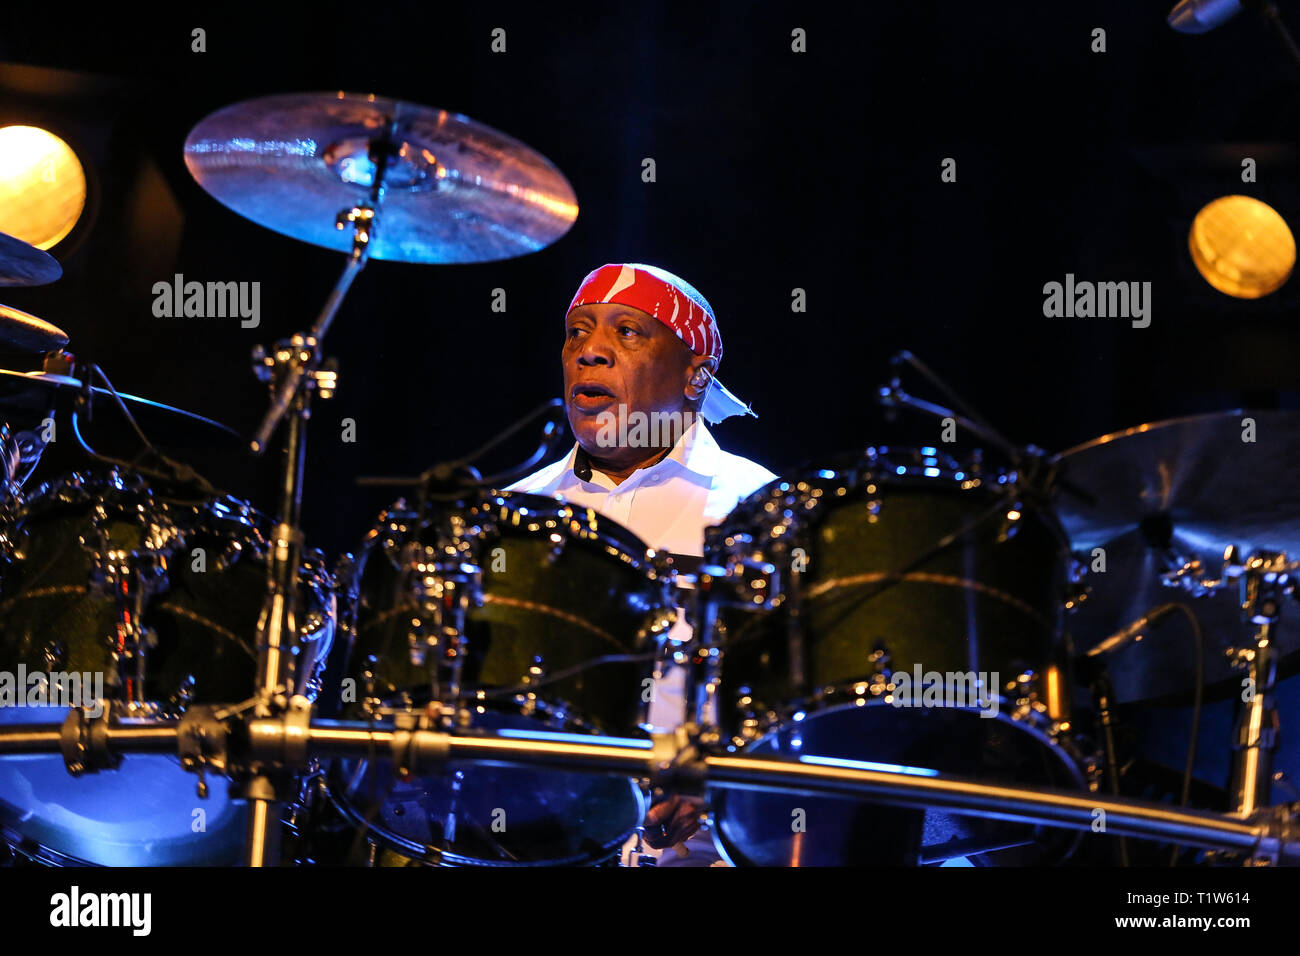 CRACOW, POLAND - MARCH 16, 2016: Famous American drummer Billy Cobham live on stage in ICE Cracow, Poland Stock Photo